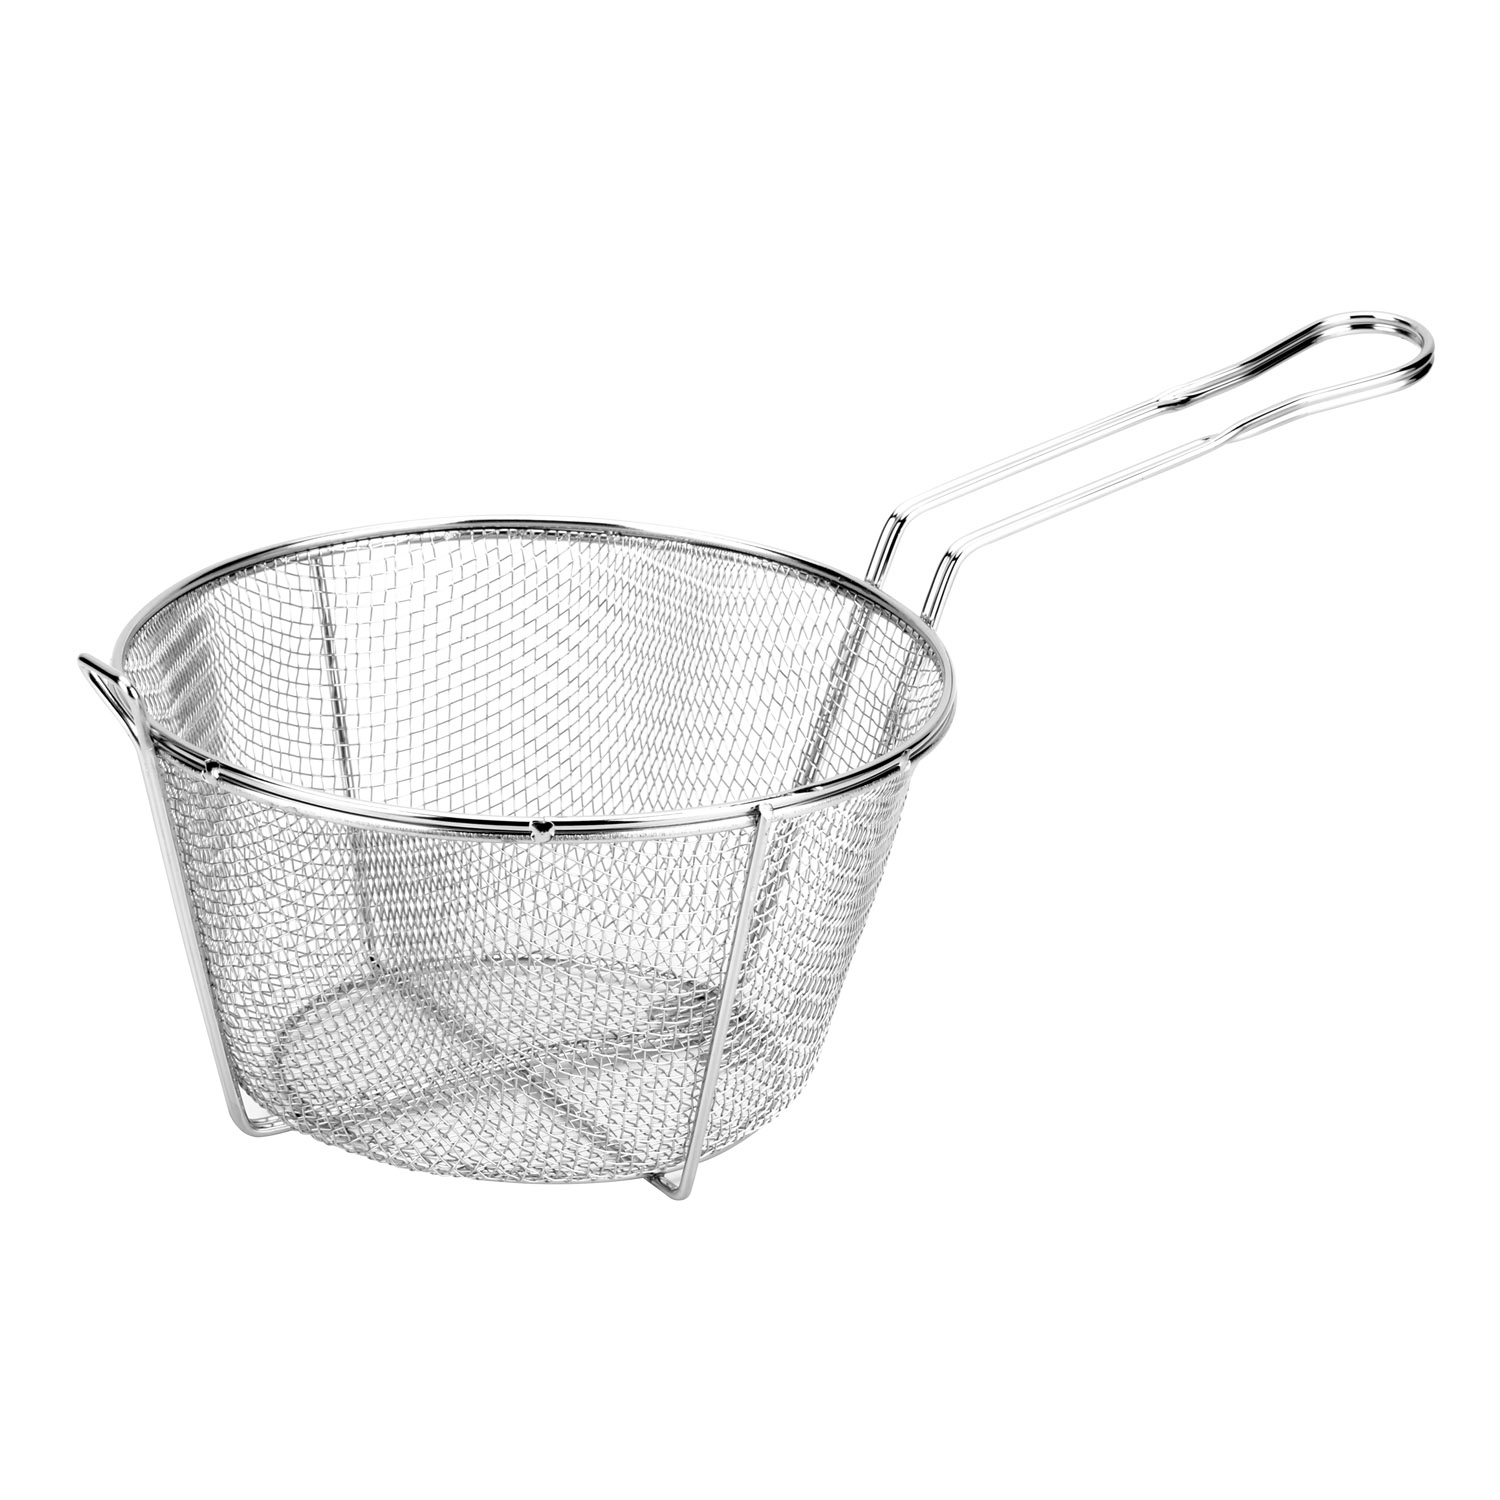 CAC China FBR8-011 Nickel-Plated Fry Basket, 1/8" Mesh Wire 11-1/2"Dia